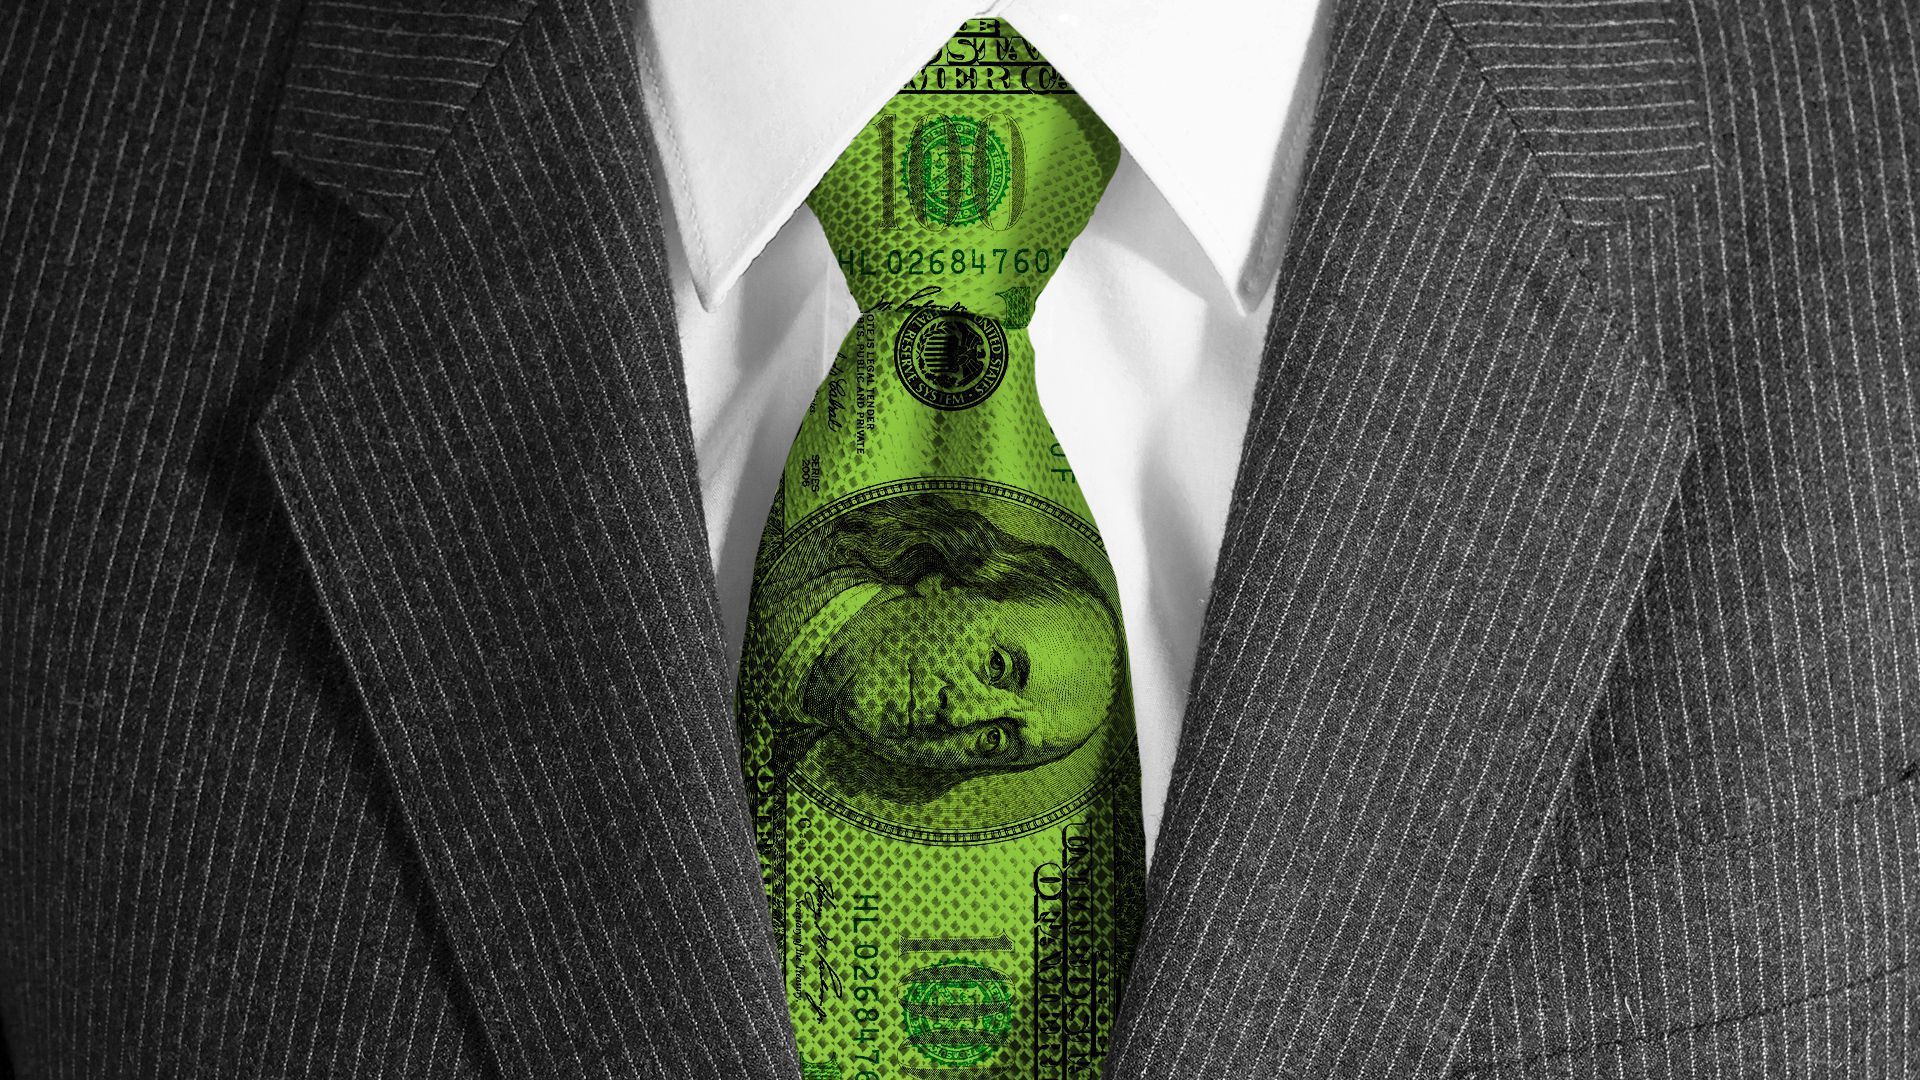 Illustration showing a suit with a tie of a $100 bill.